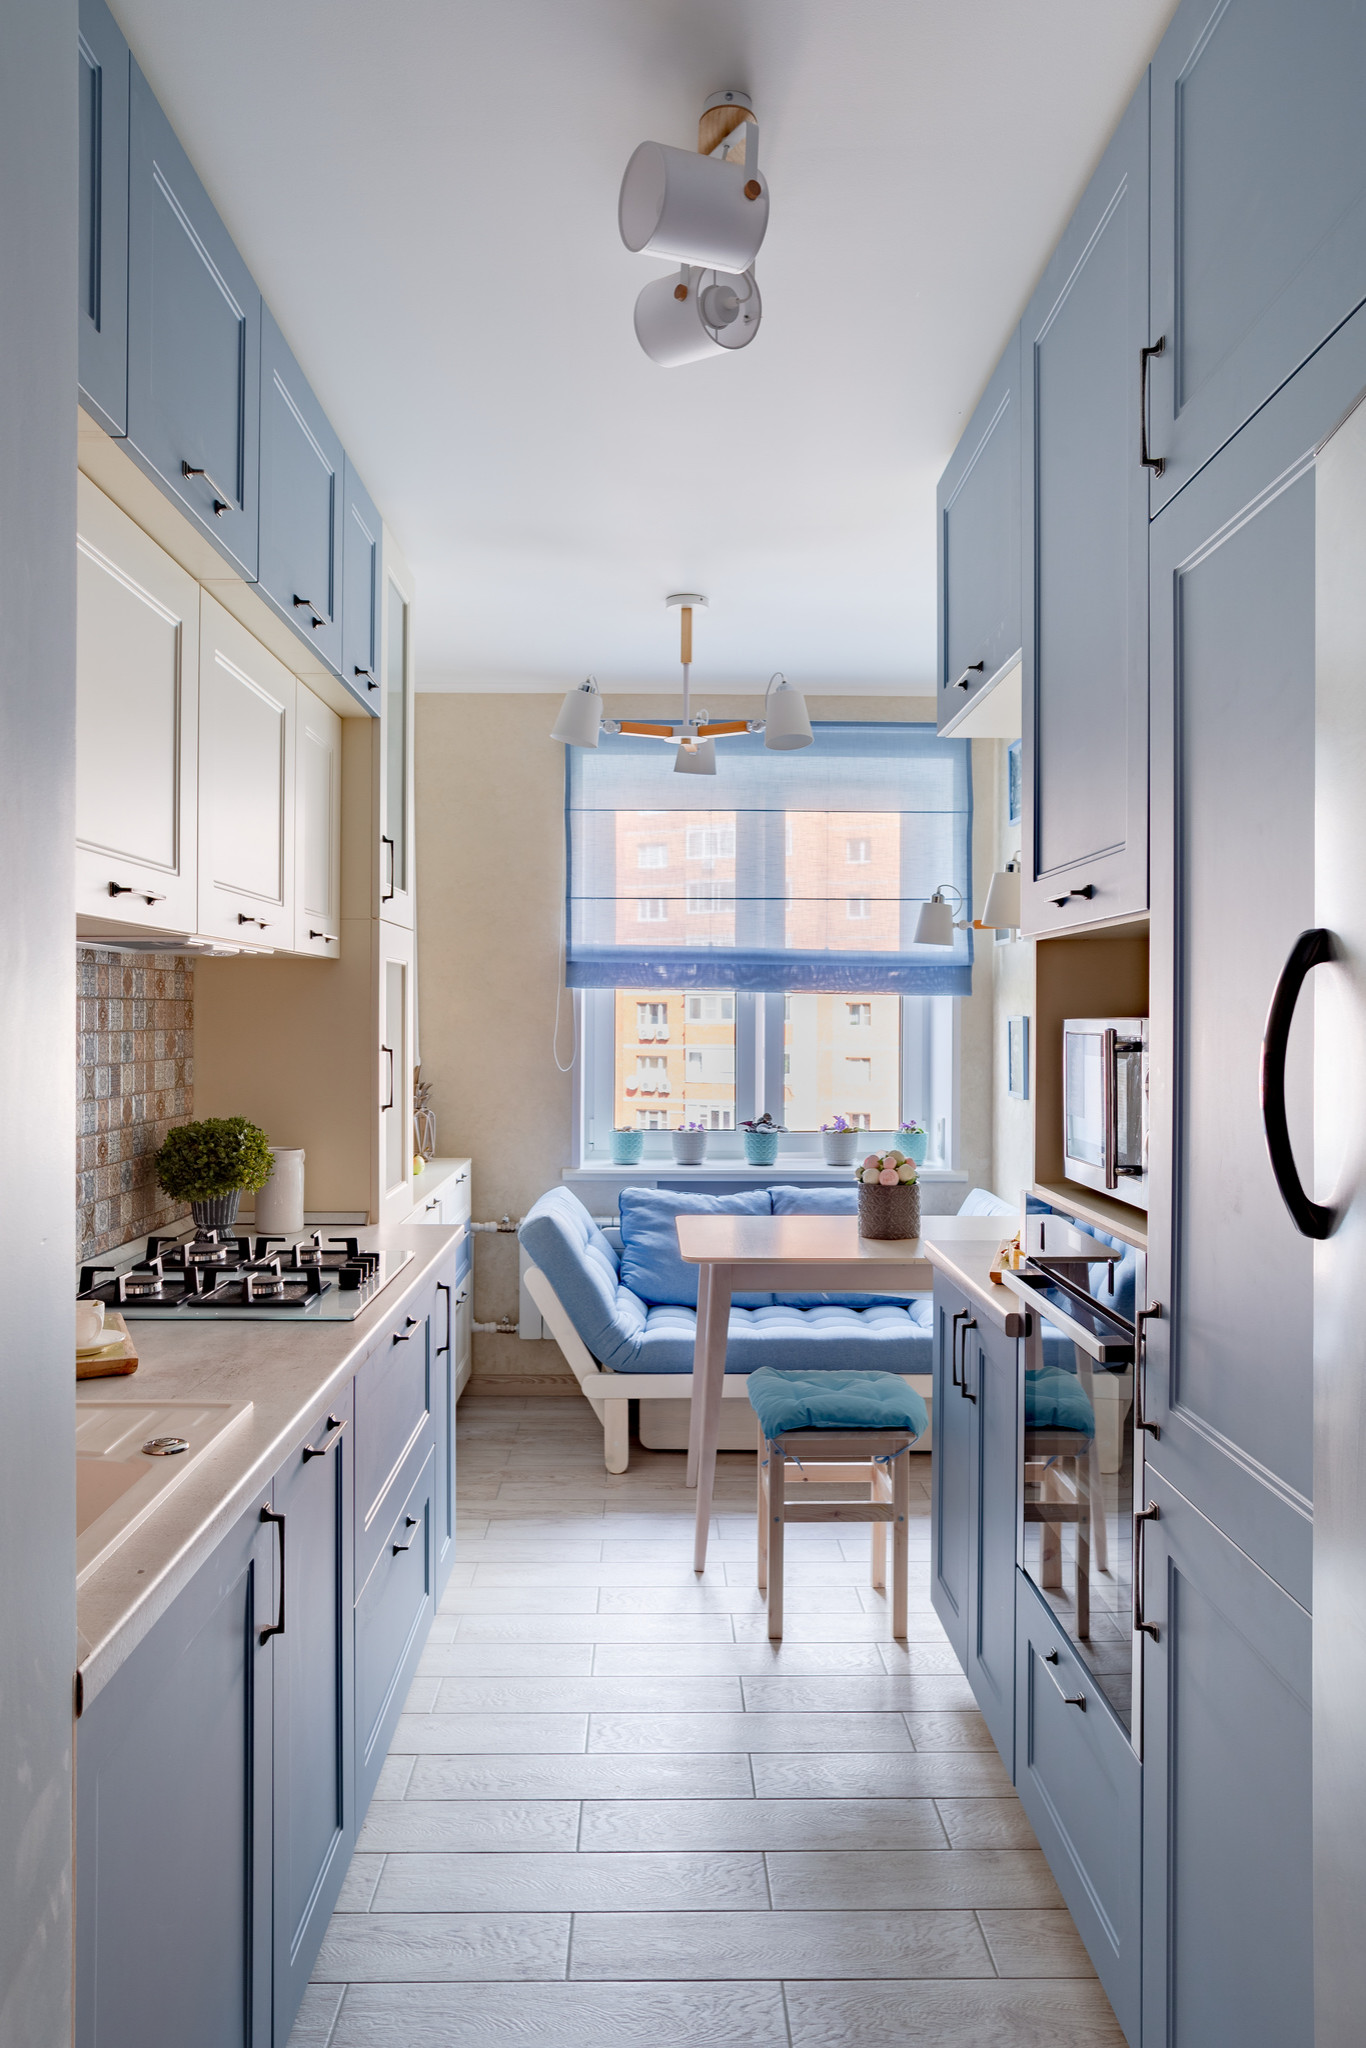 18 Small Galley Kitchen Ideas You'll Love   August, 18   Houzz